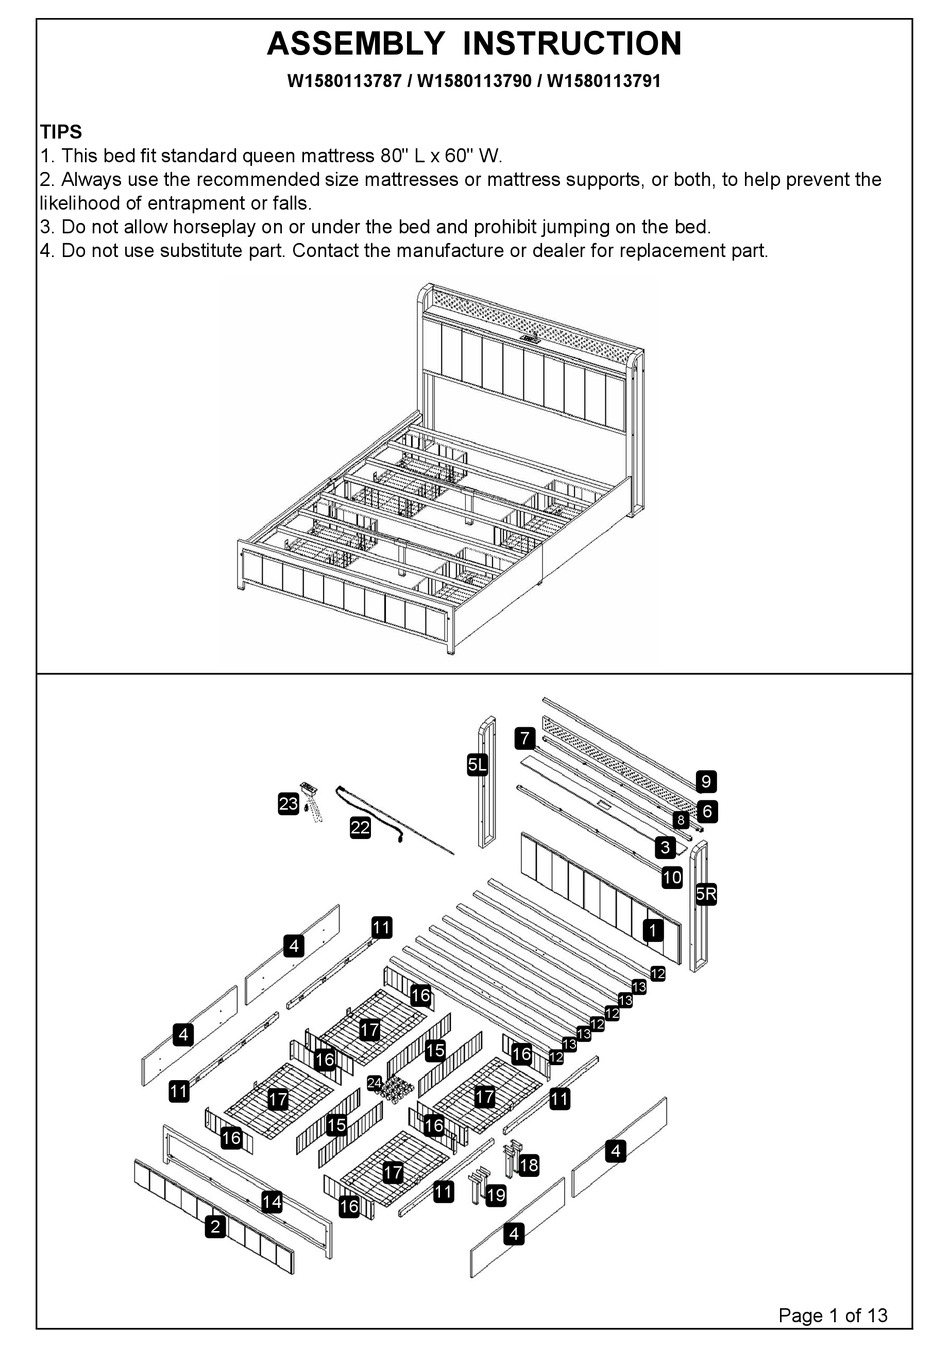 BED BATH & BEYOND W1580113787 ASSEMBLY INSTRUCTION MANUAL Pdf Download ...